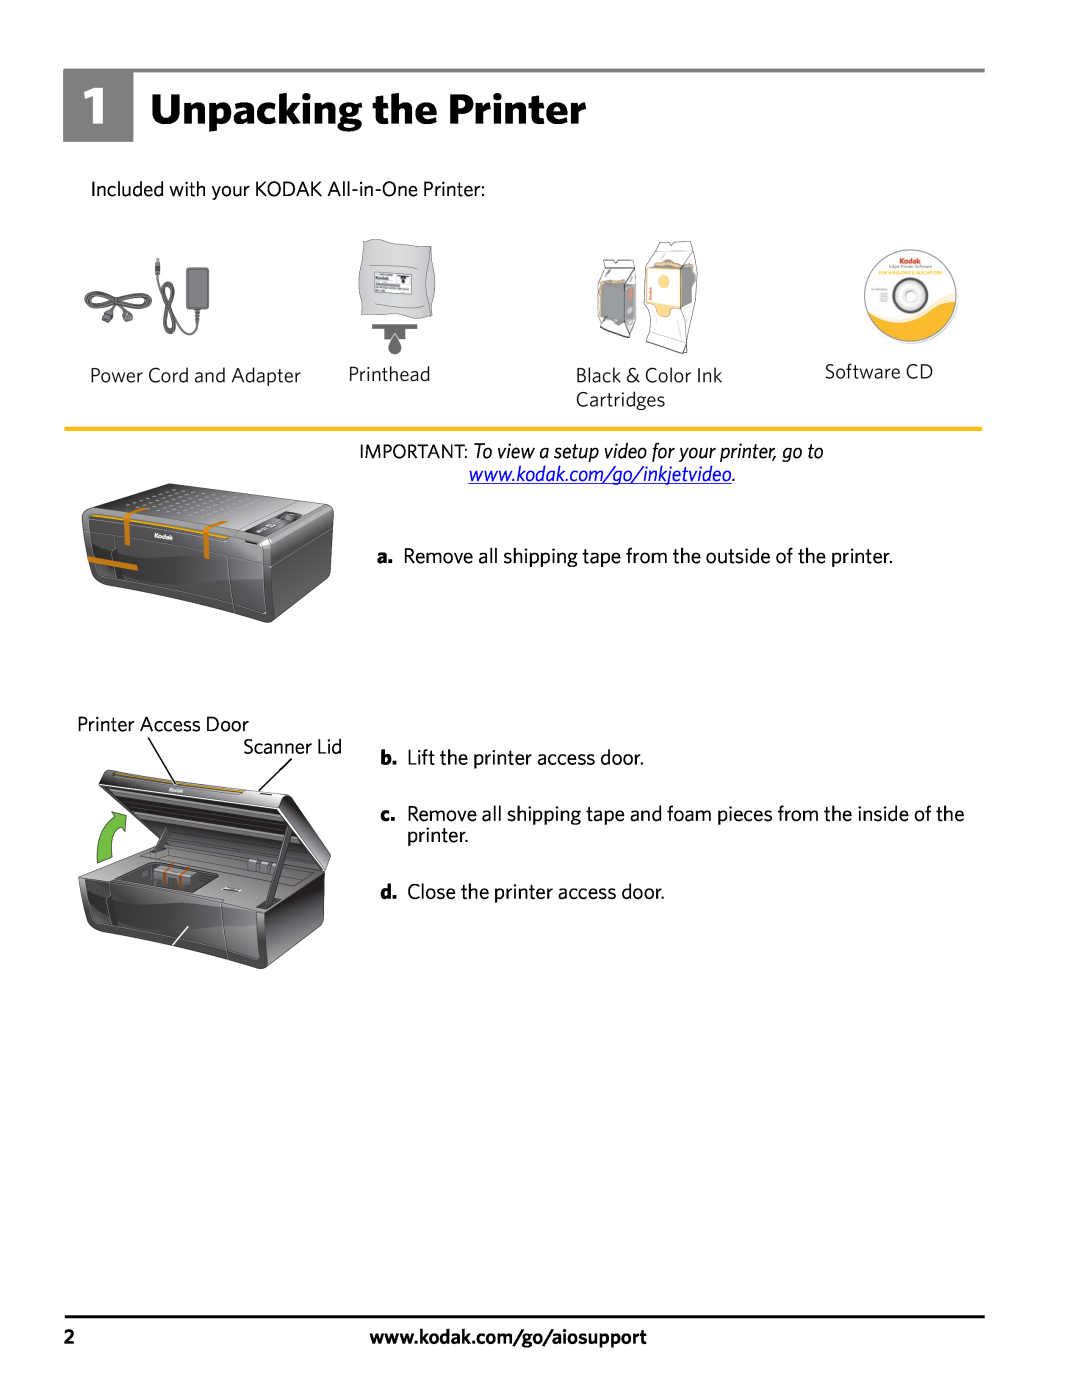 Kodak 3200 manual Unpacking the Printer, IMPORTANT To view a setup video for your printer, go to 